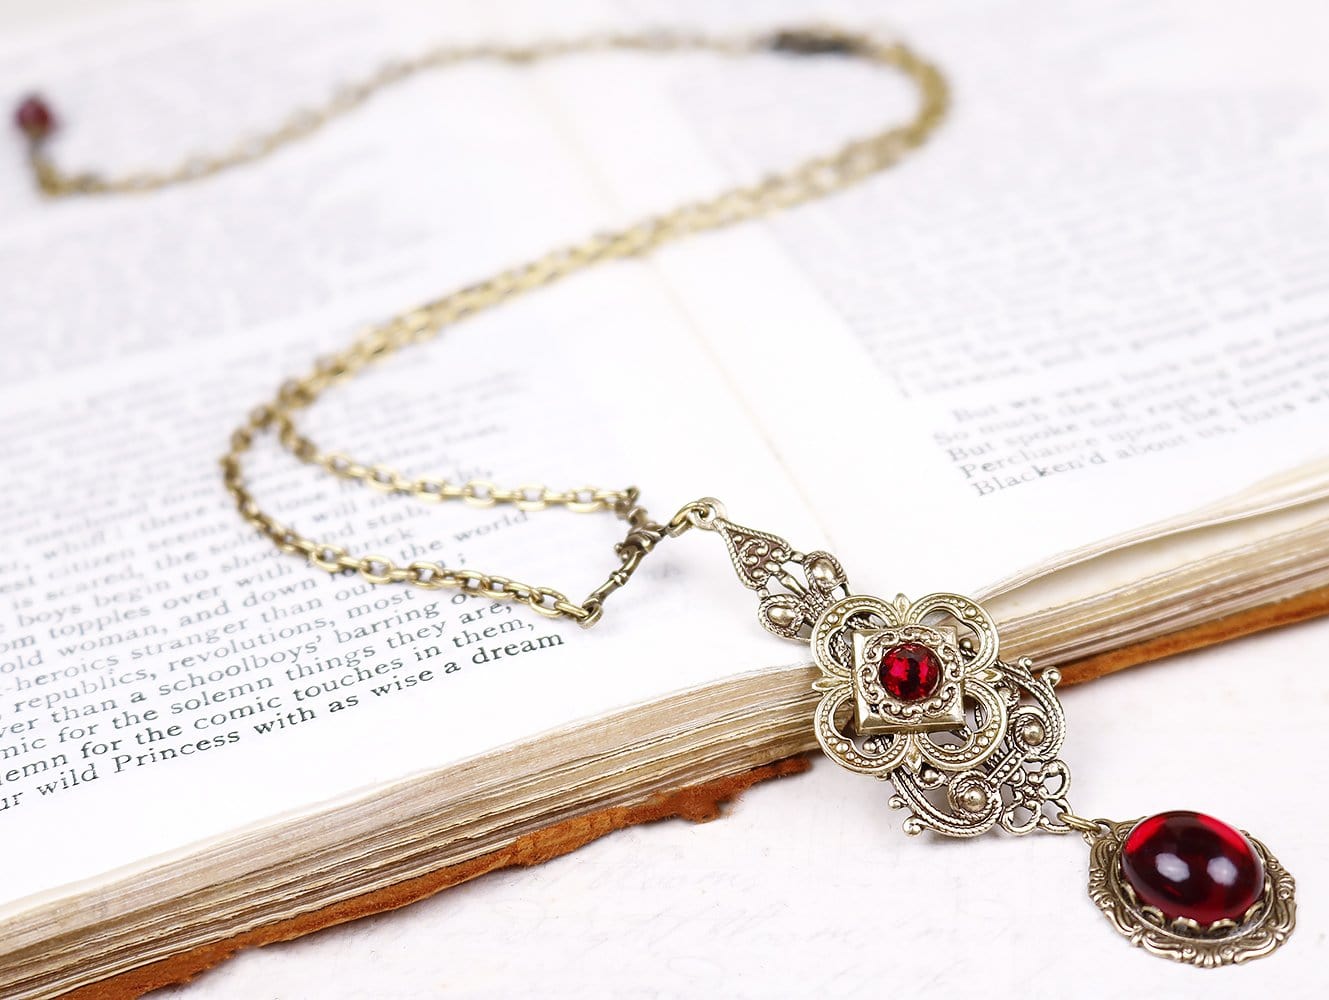 Avalon Pendant Necklace in Garnet and Antiqued Brass by Rabbitwood and Reason